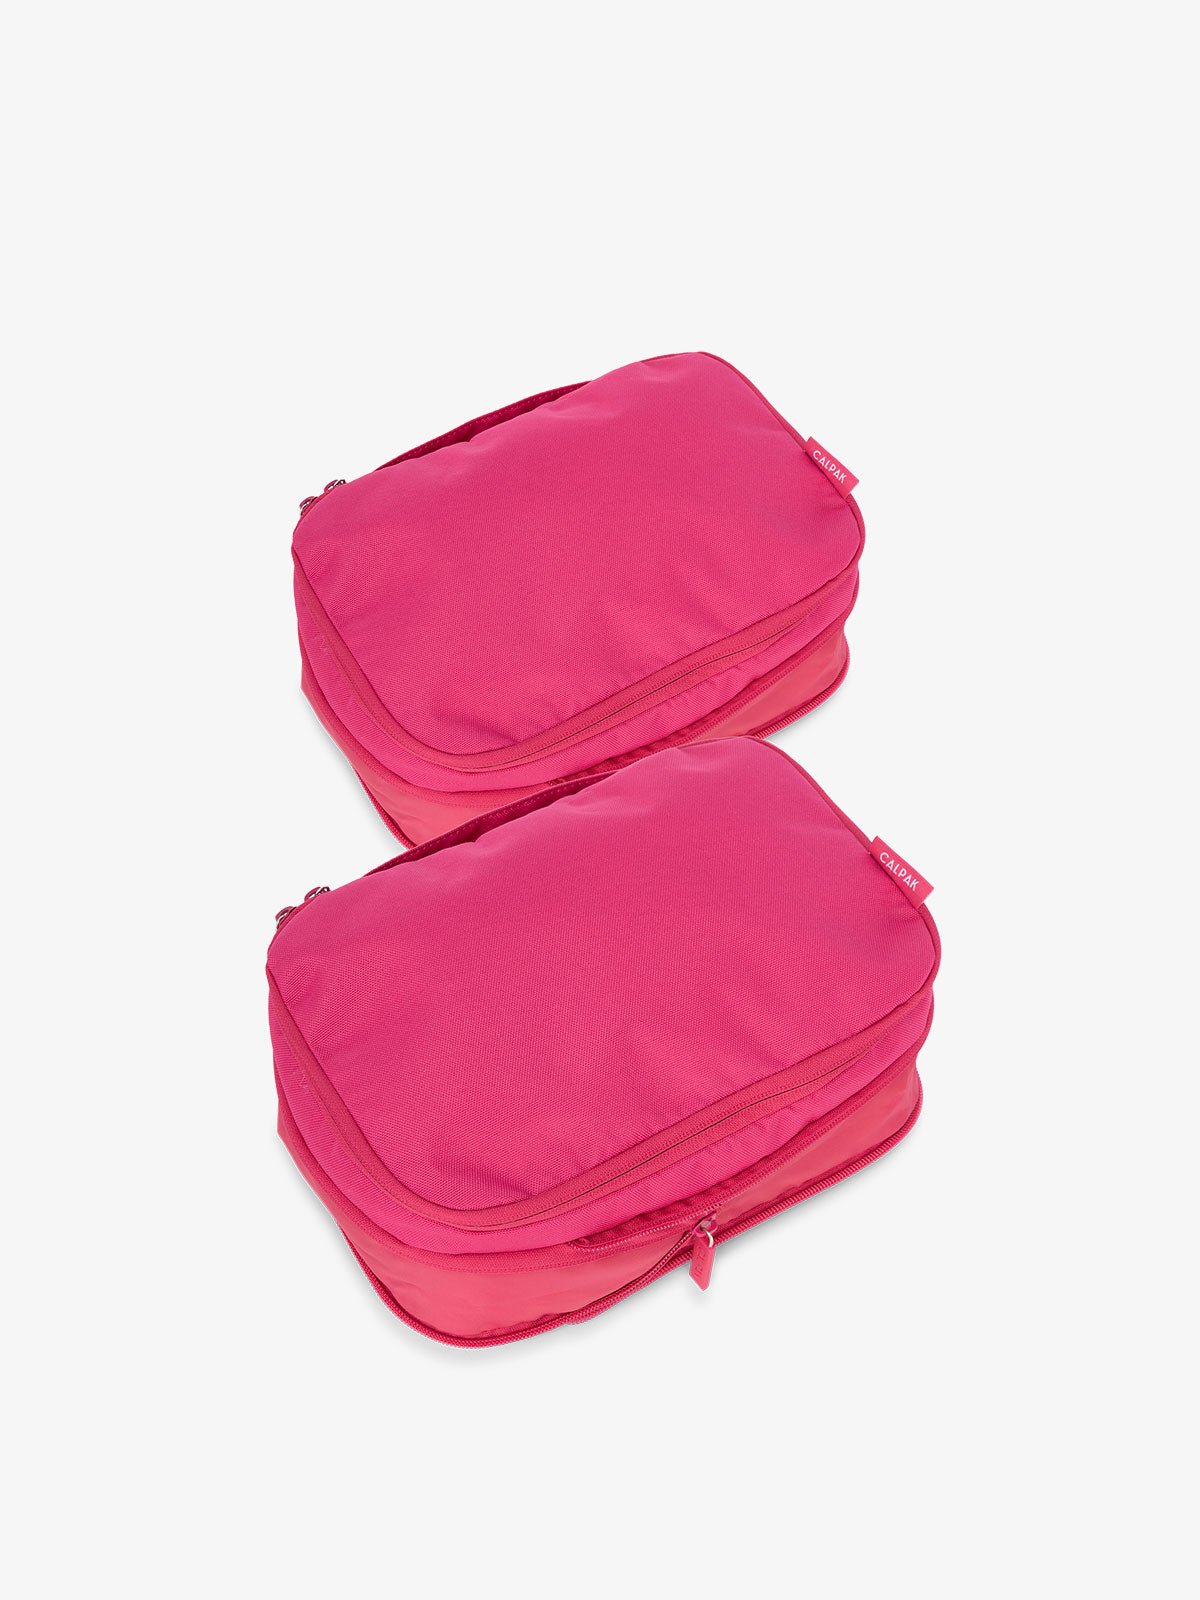 CALPAK small compression packing cubes with top handles and expandable by 4.5 inches in hot pink